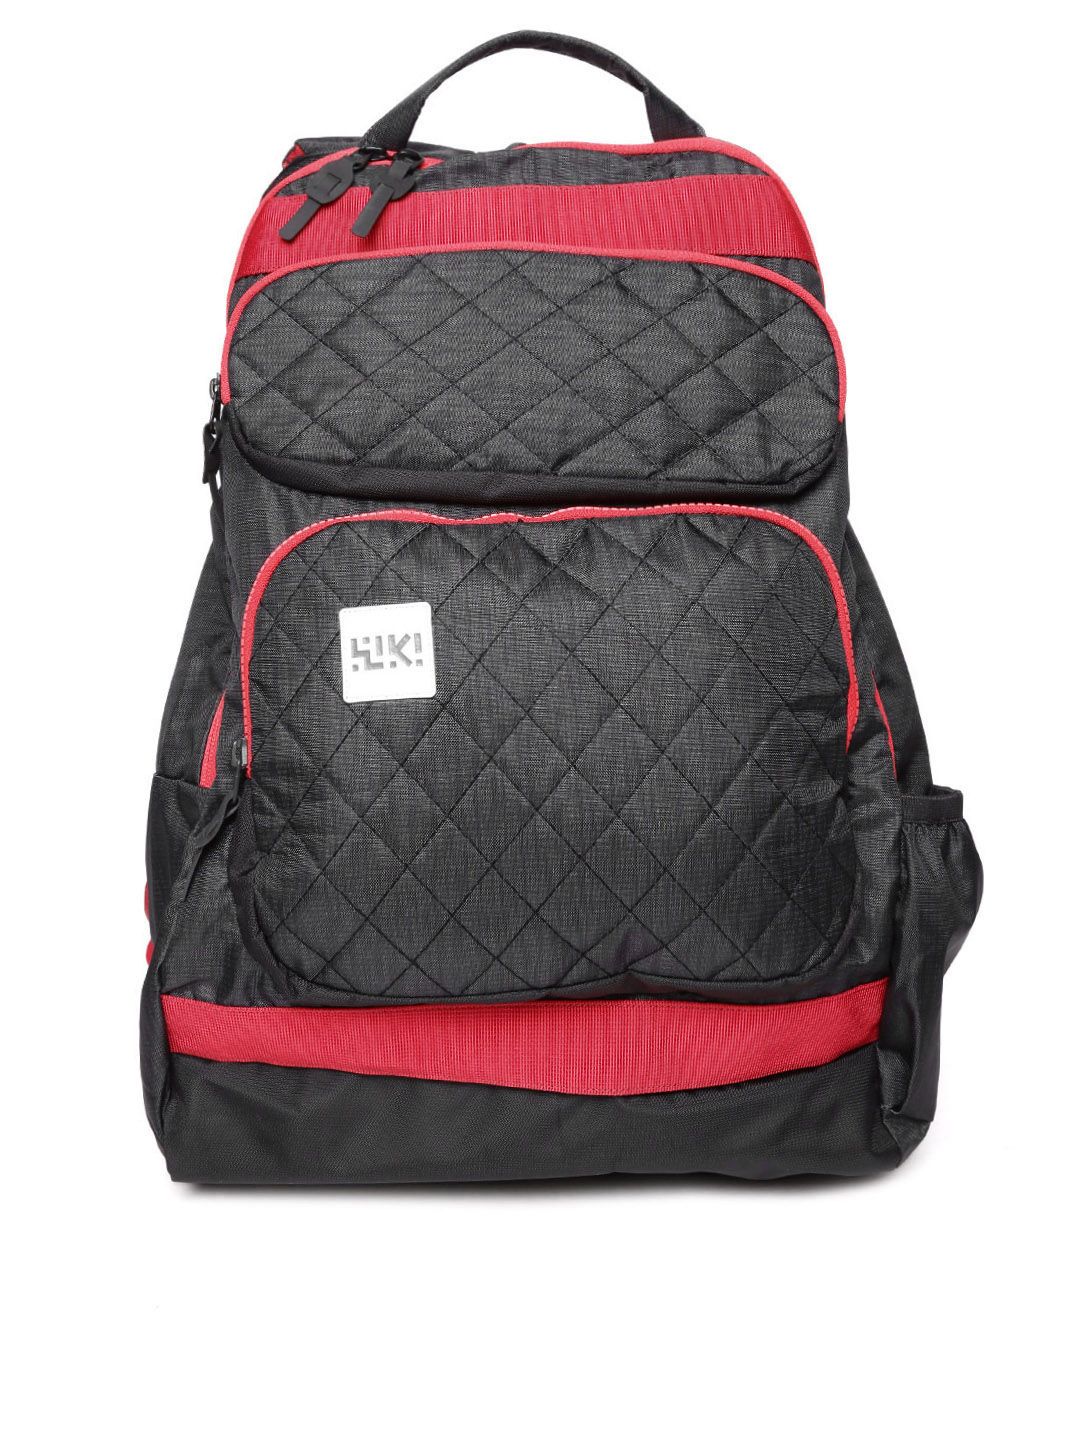 Wildcraft Unisex Black & Red Toss Quilted Reversible Backpack Price in India